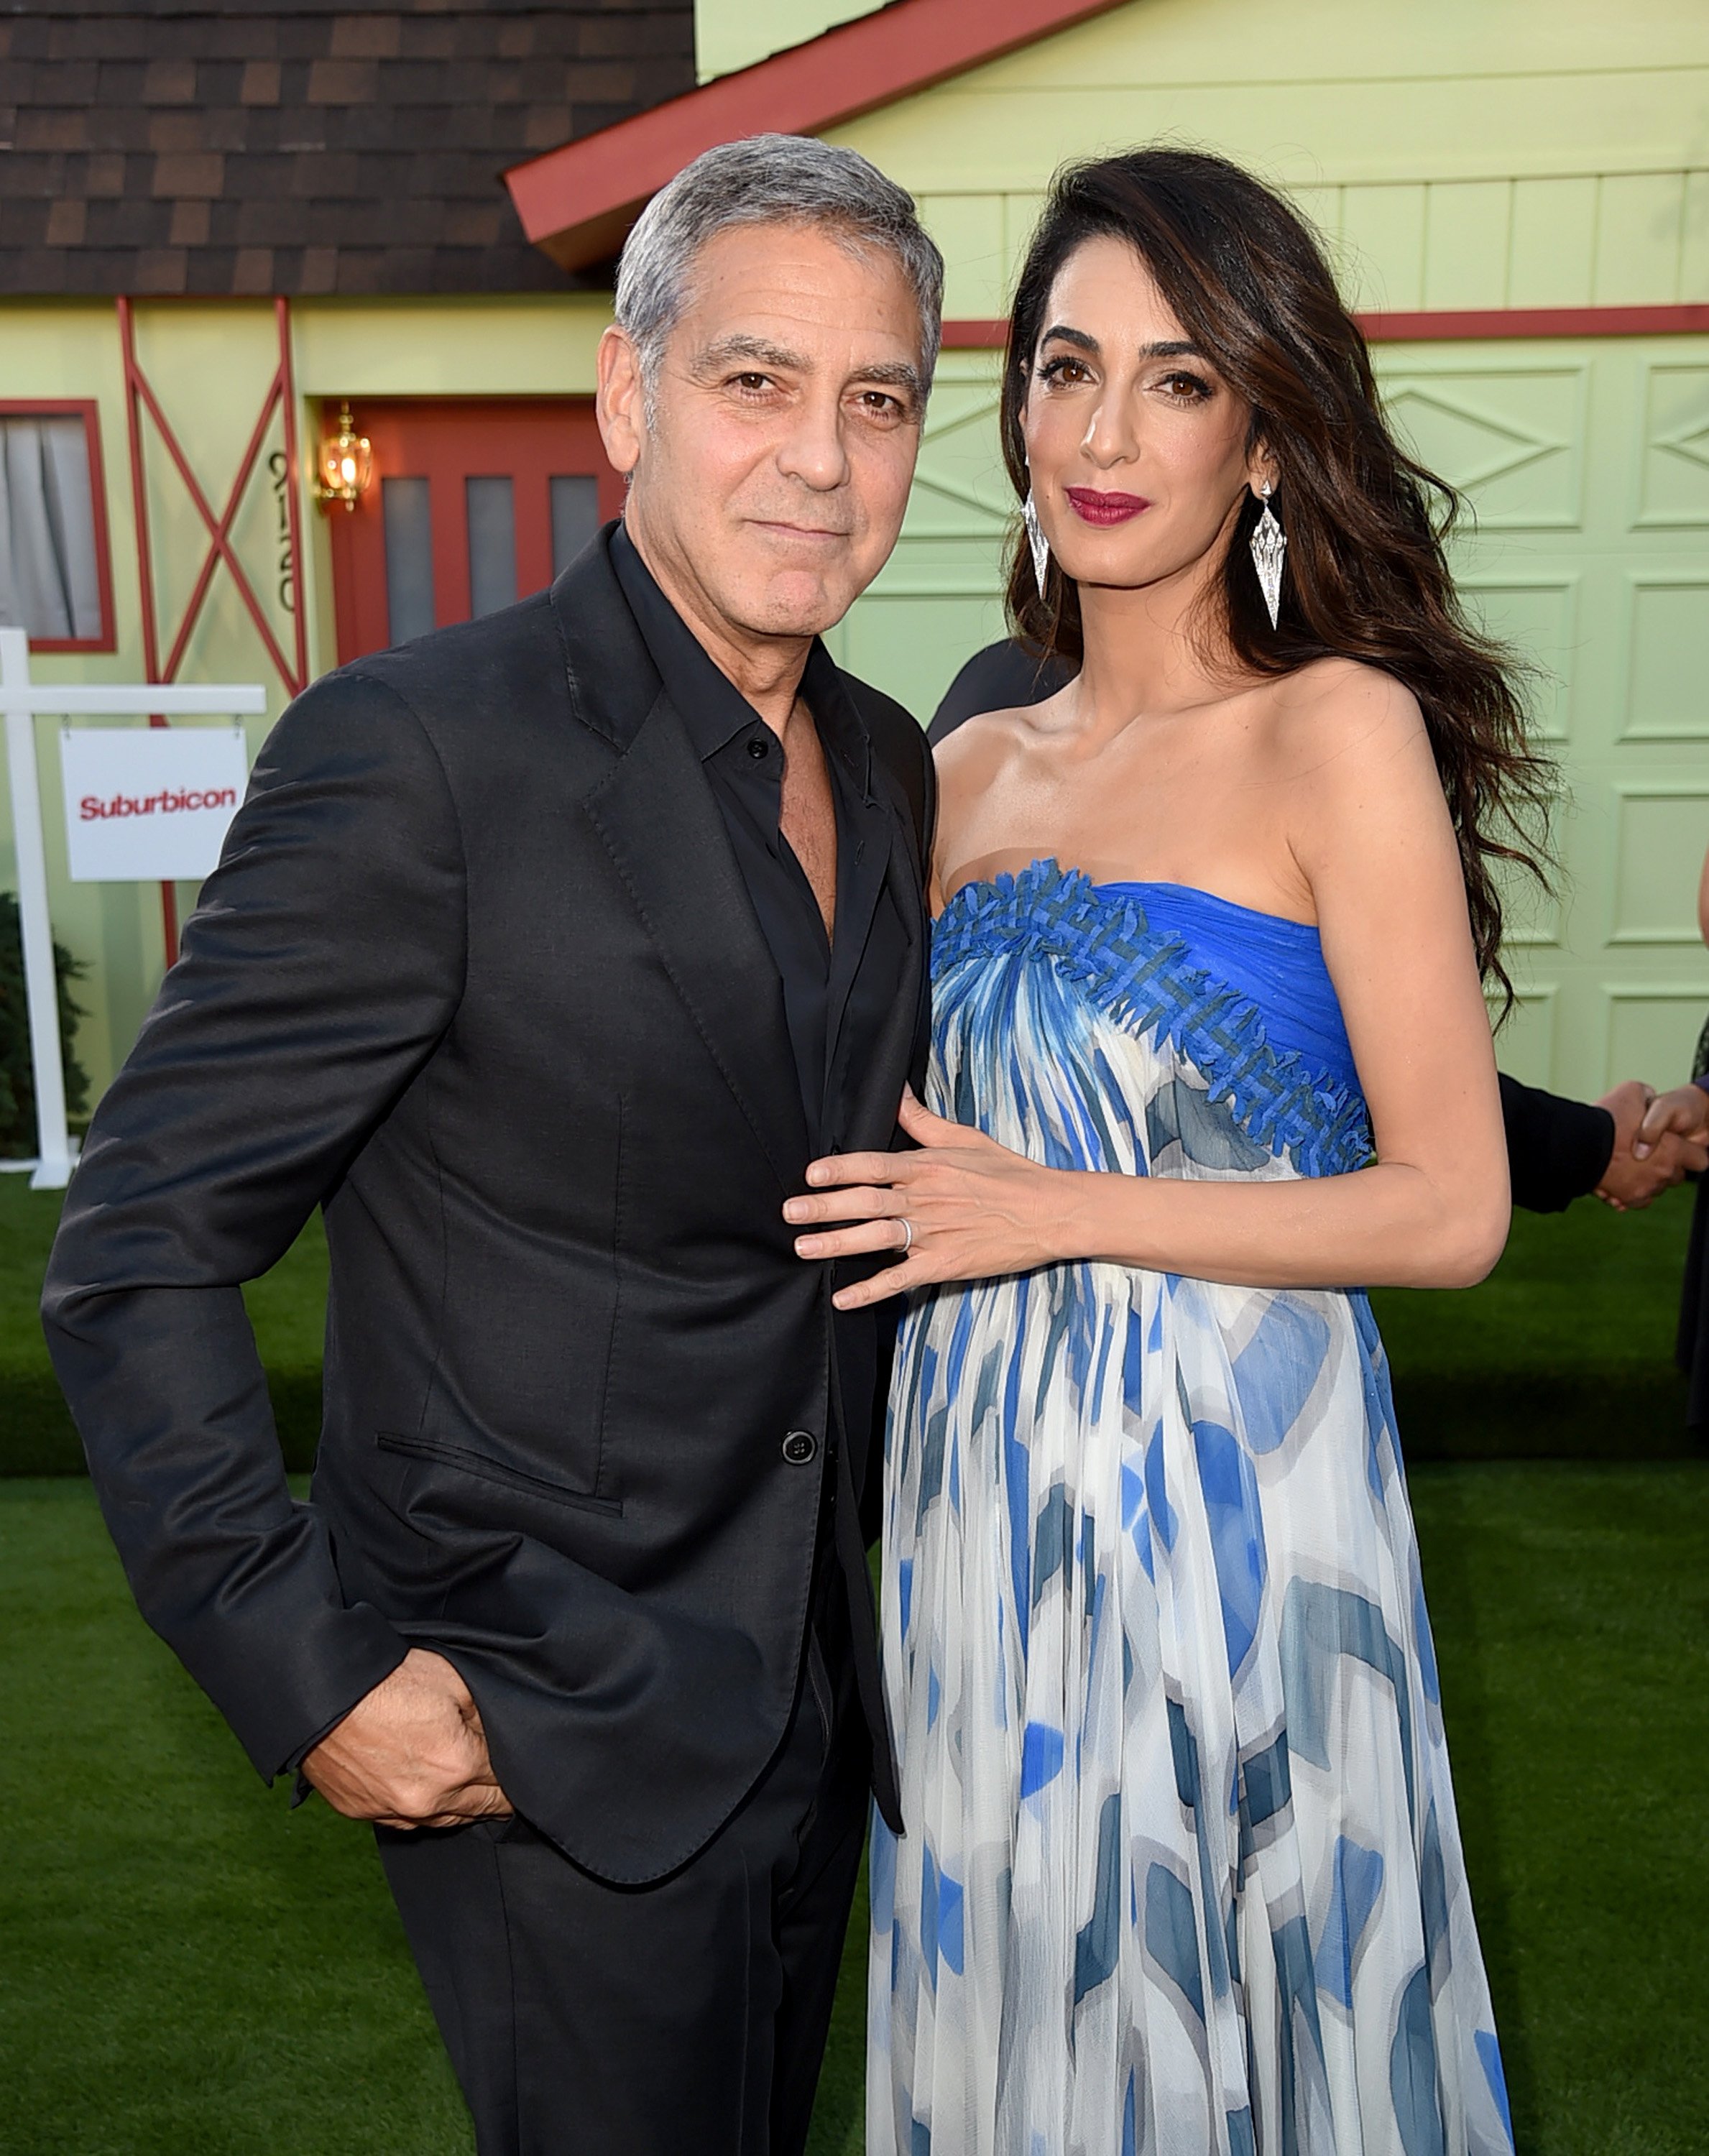 George Clooney and his wife Amal Clooney arrive at the premiere of Paramount Pictures' "Suburbicon" at the Village Theatre on October 22, 2017 in Los Angeles, California | Source: Getty Images